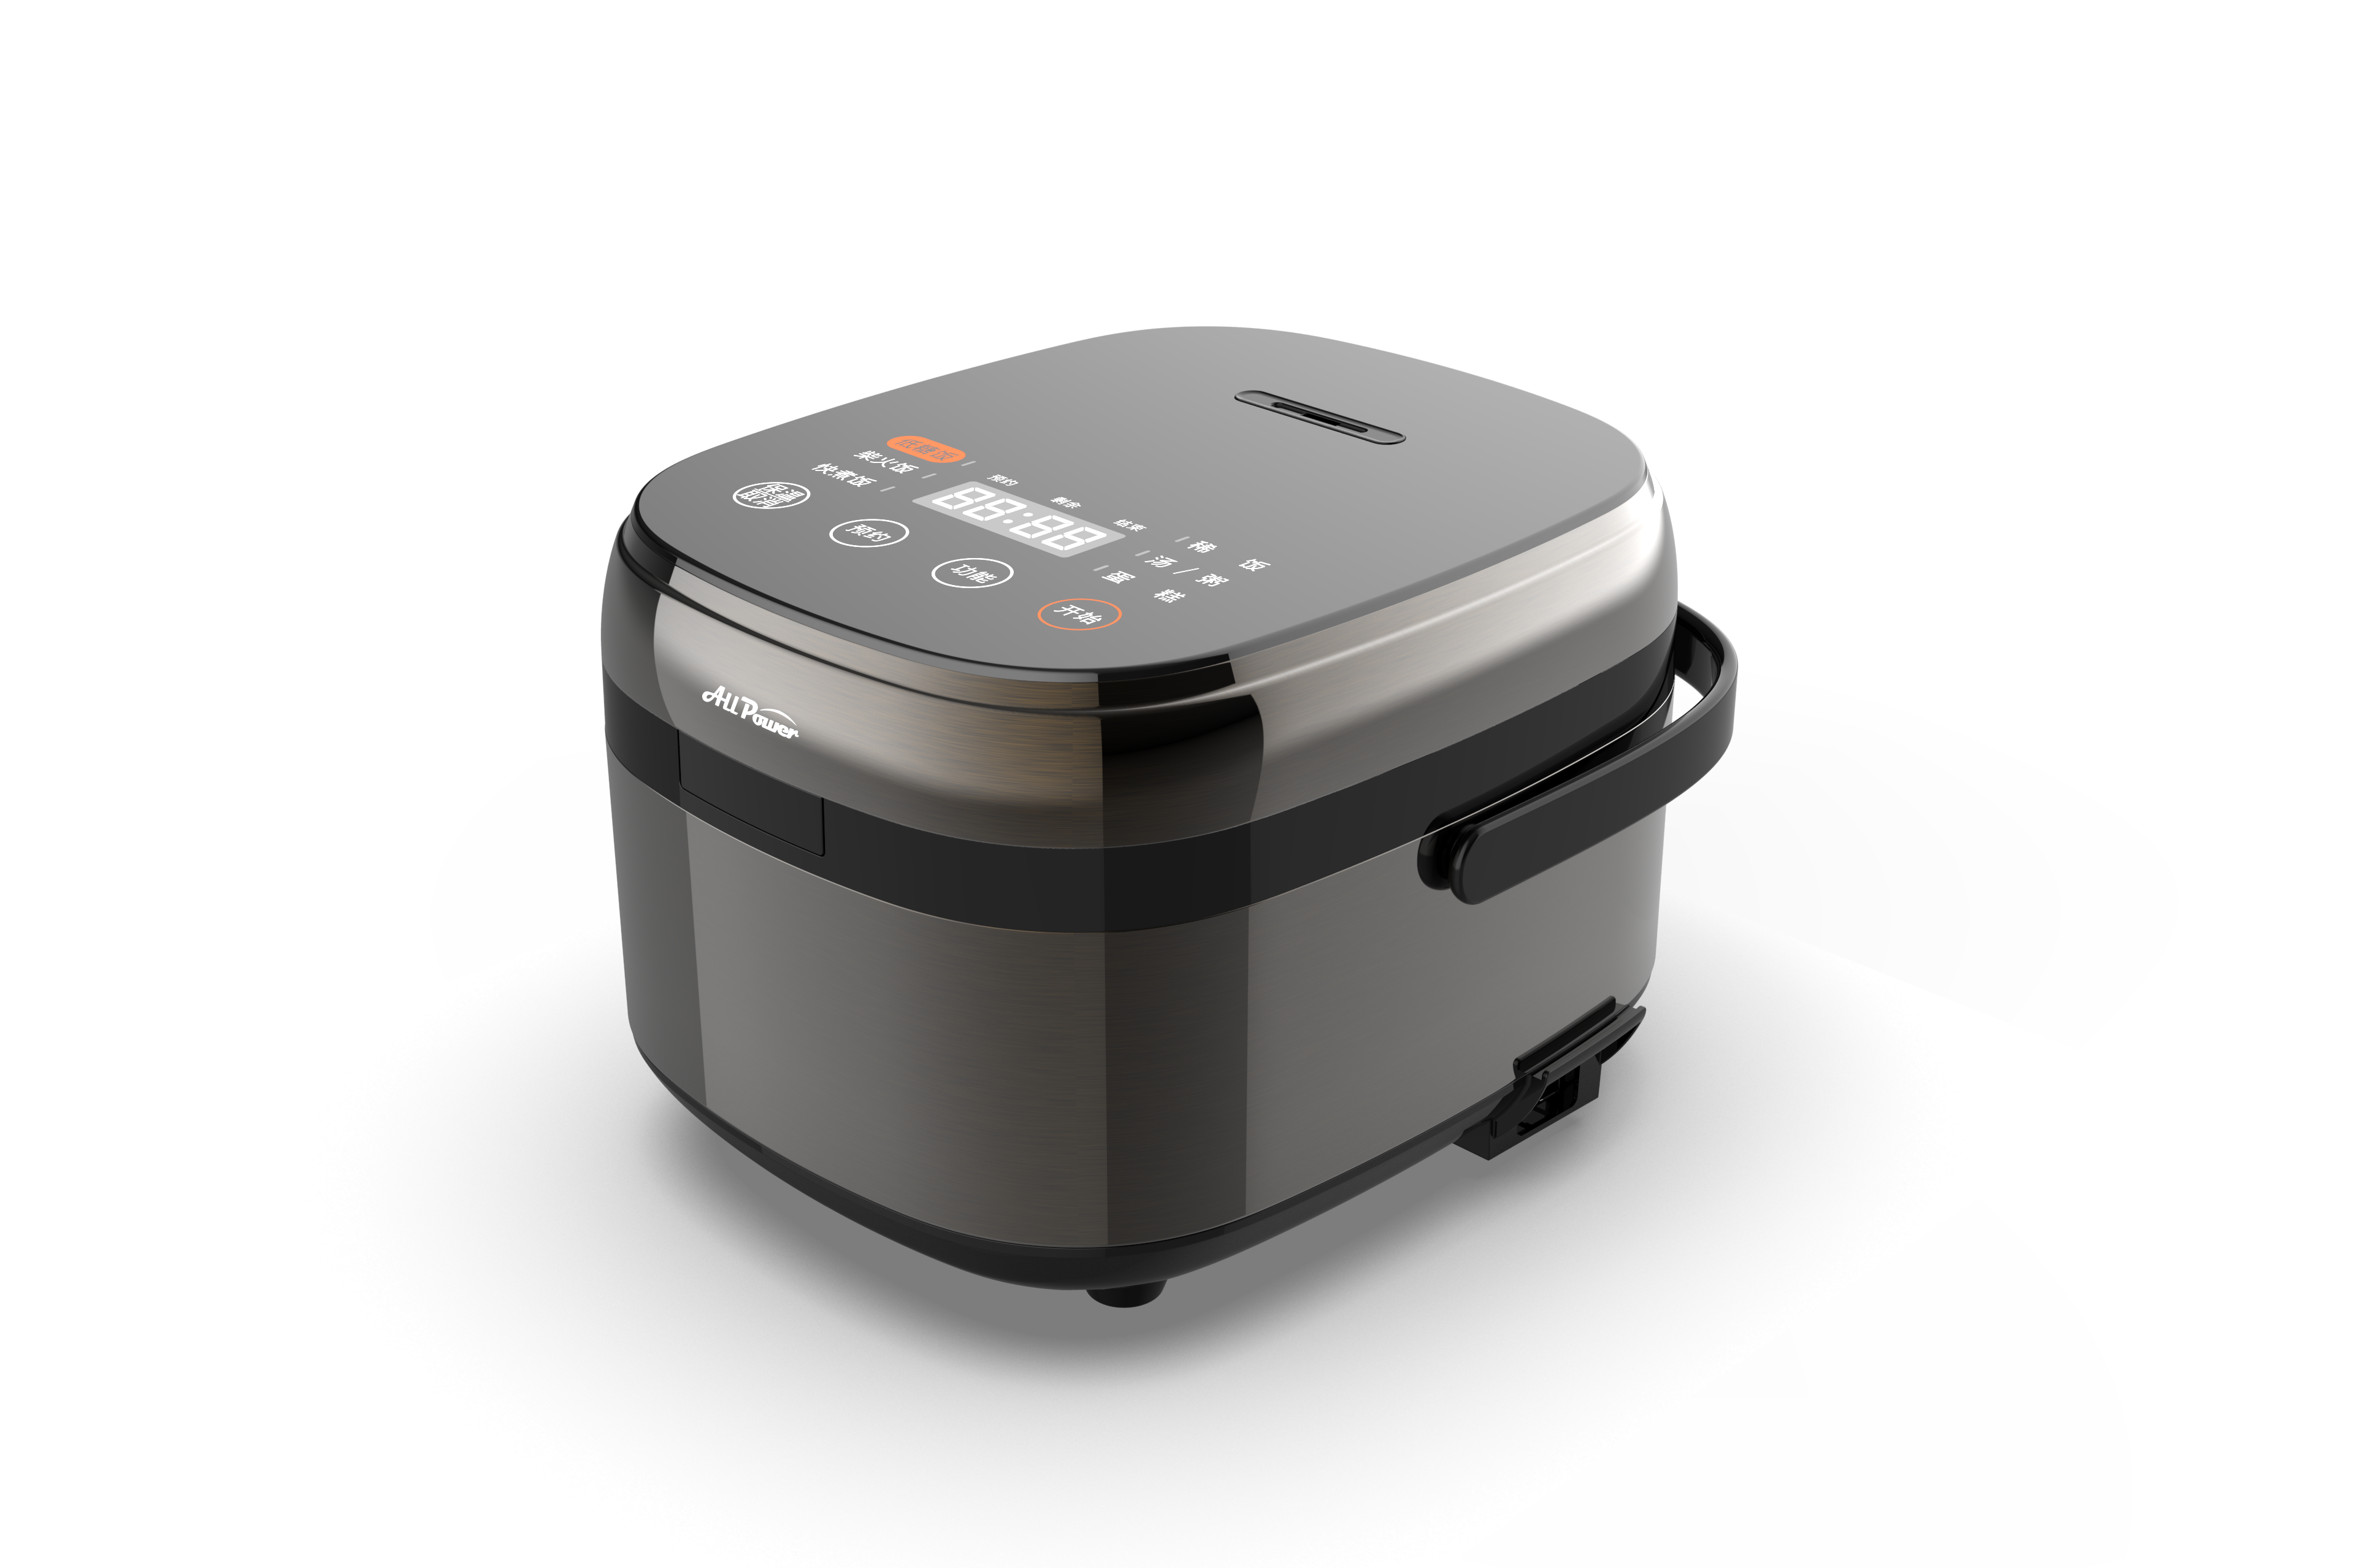 What Are the Key Features of a Portable Induction Cooktop?